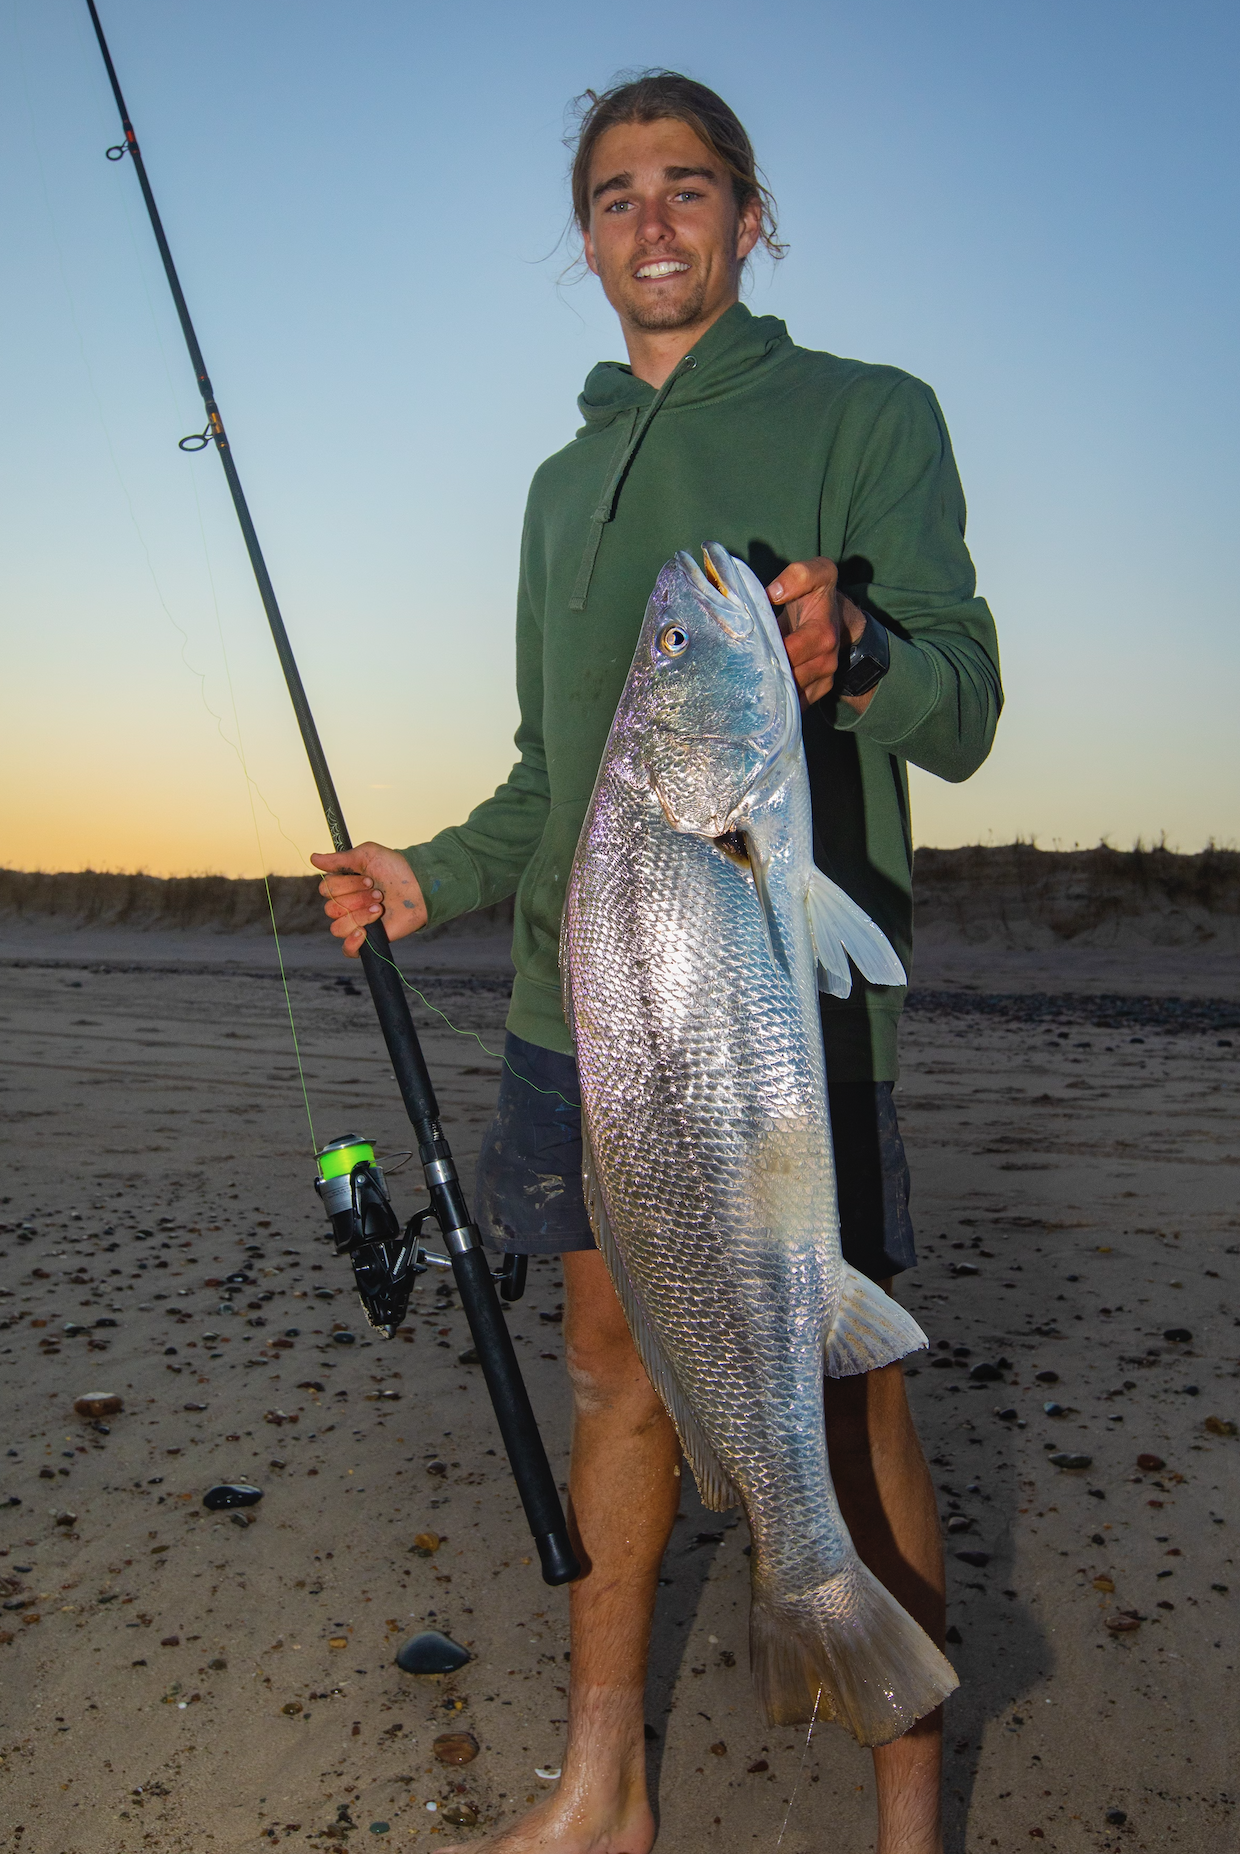 Top tips for Beach Fishing